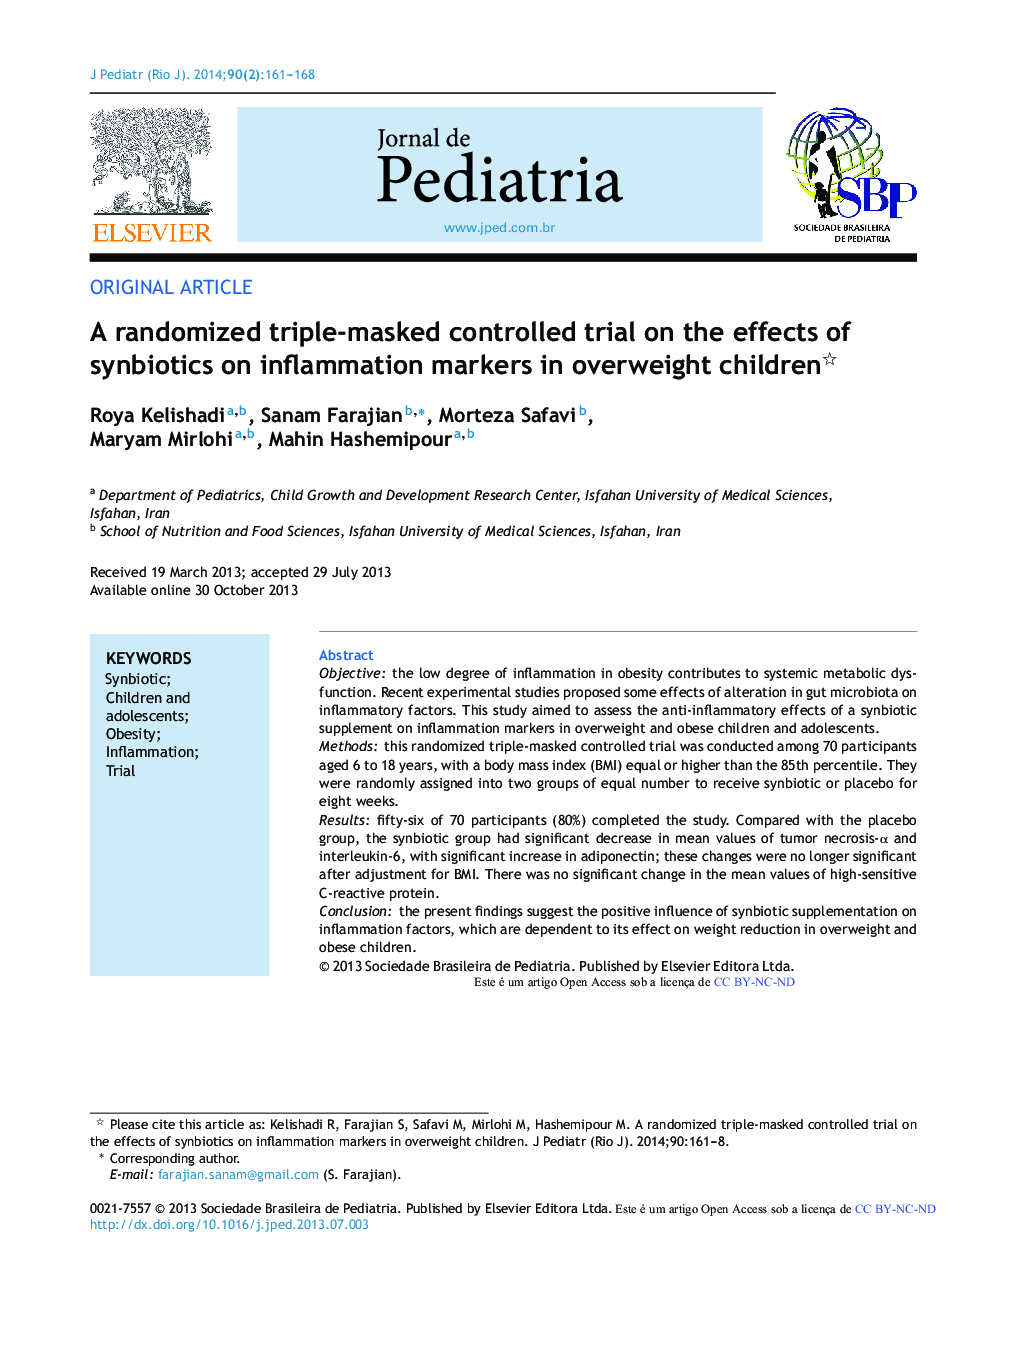 A randomized triple-masked controlled trial on the effects of synbiotics on inflammation markers in overweight children 